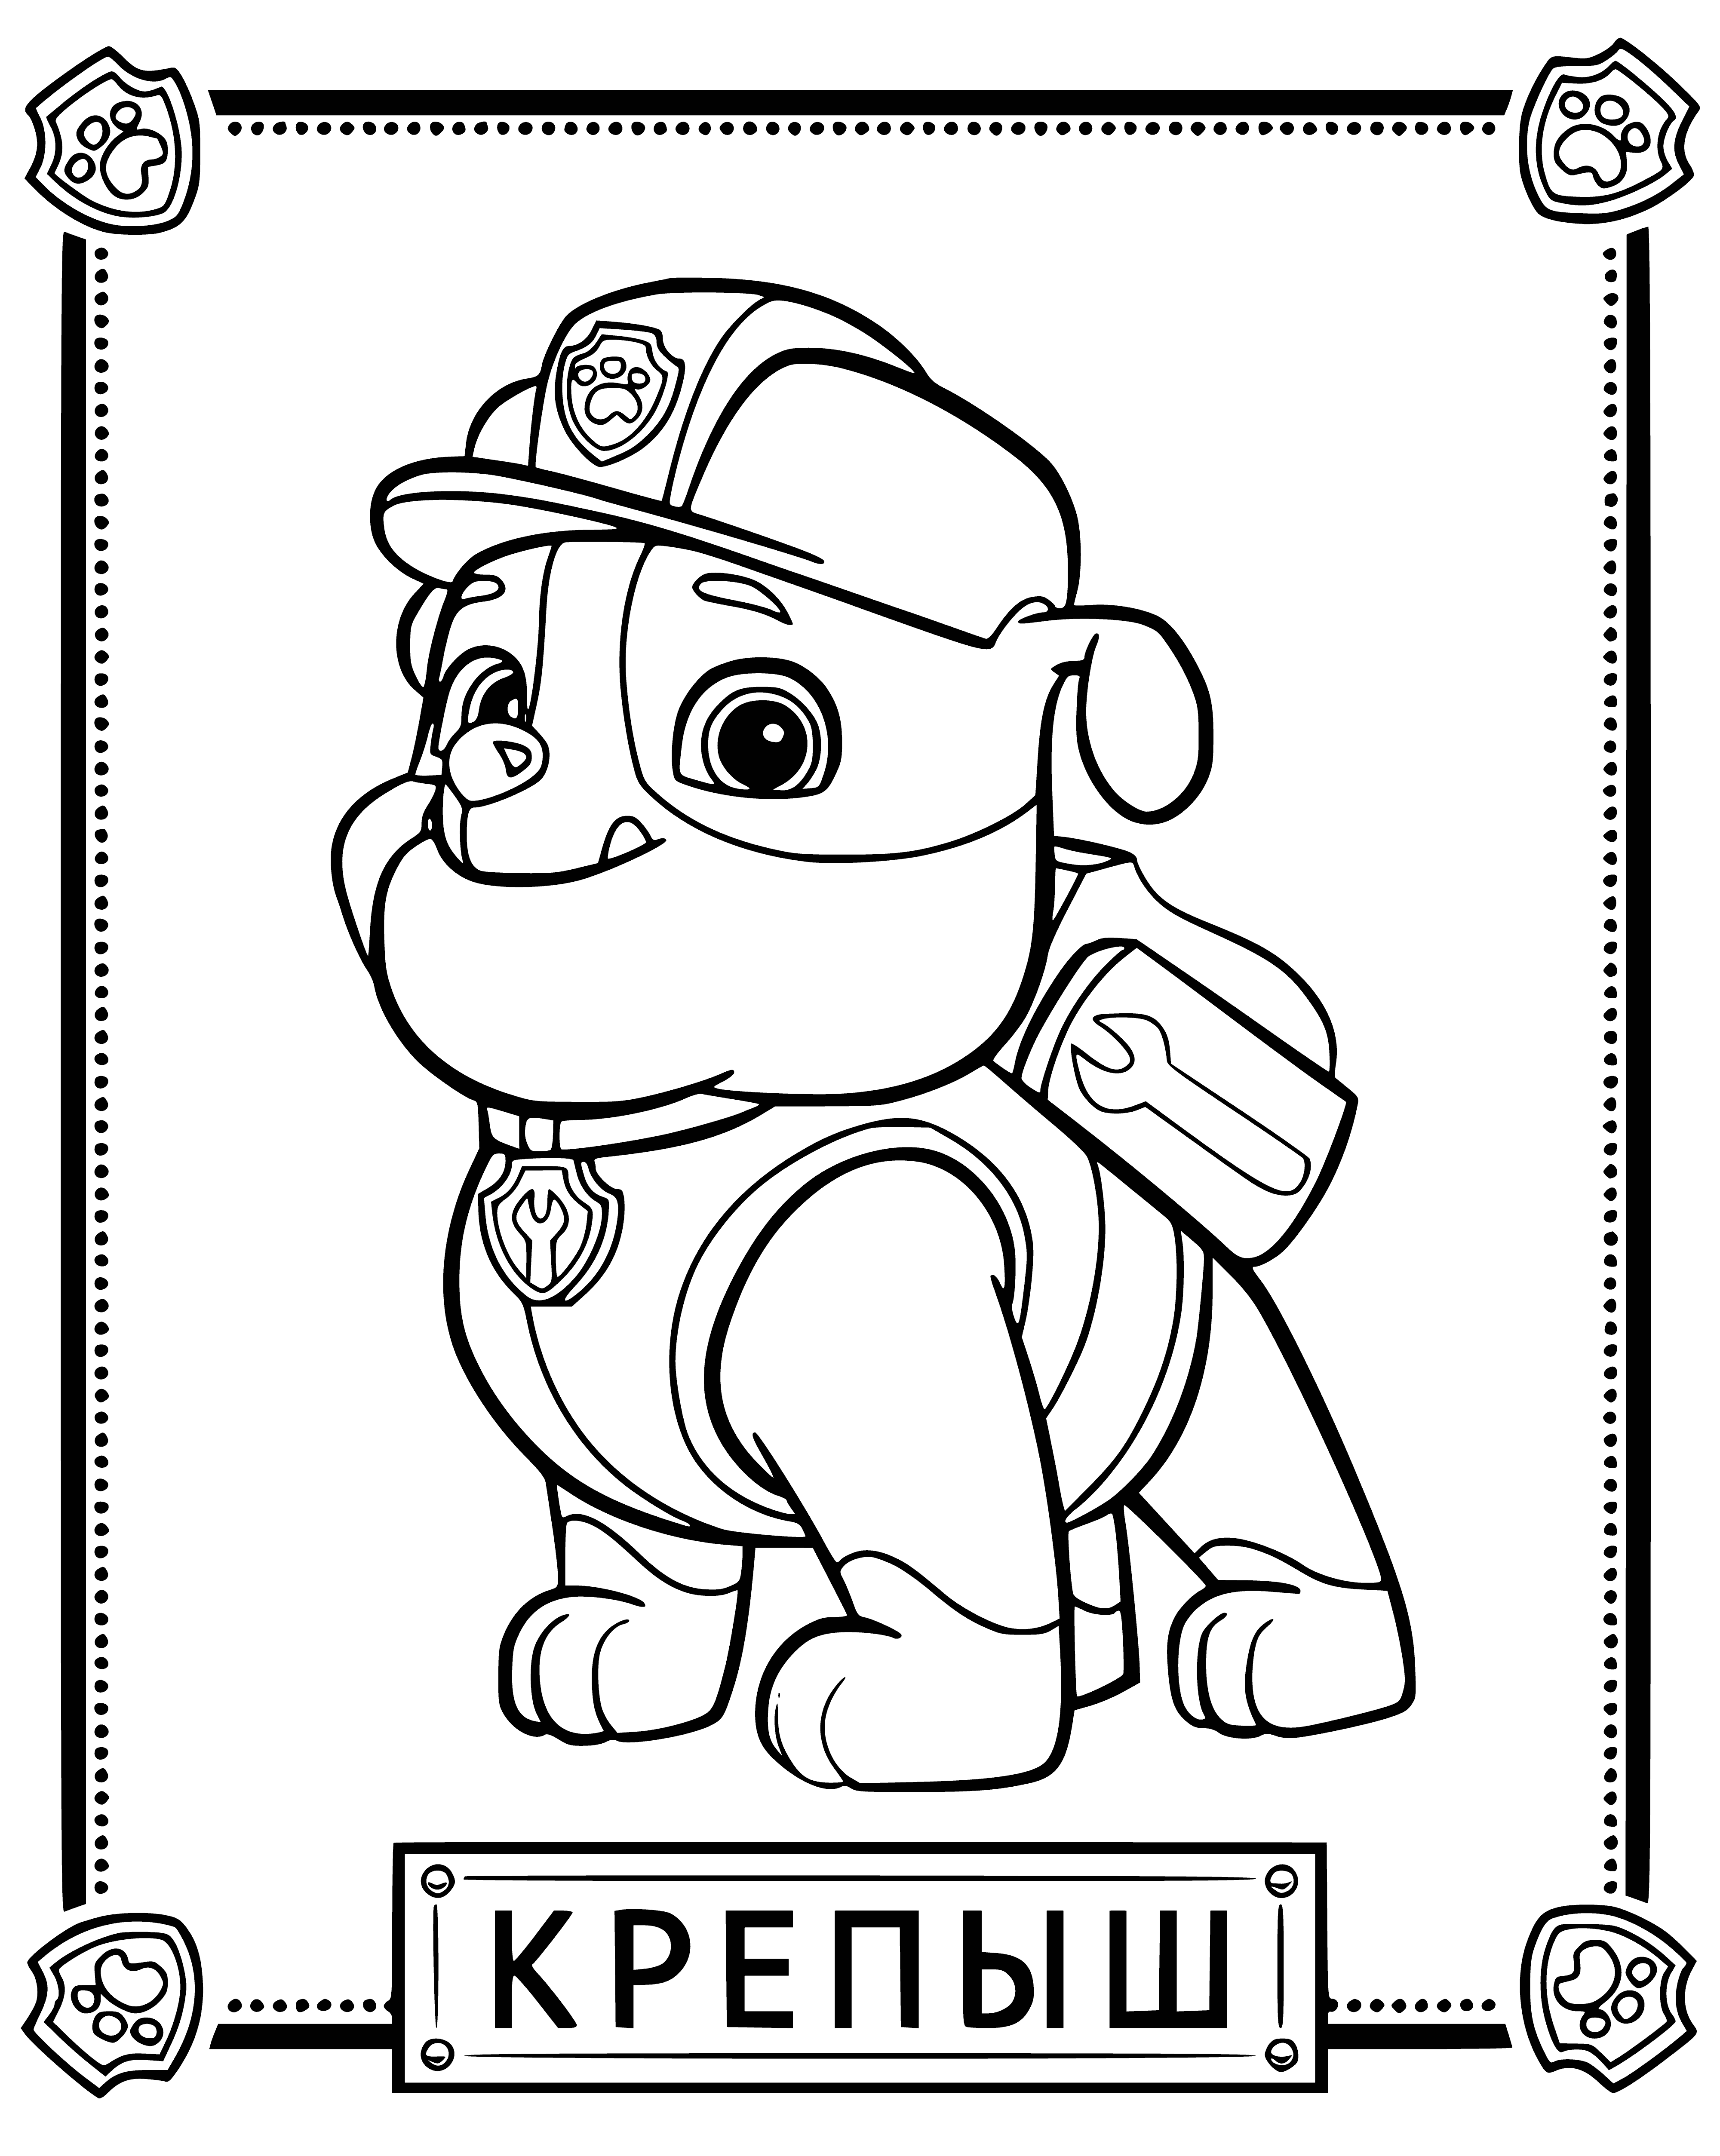 Fortress coloring page